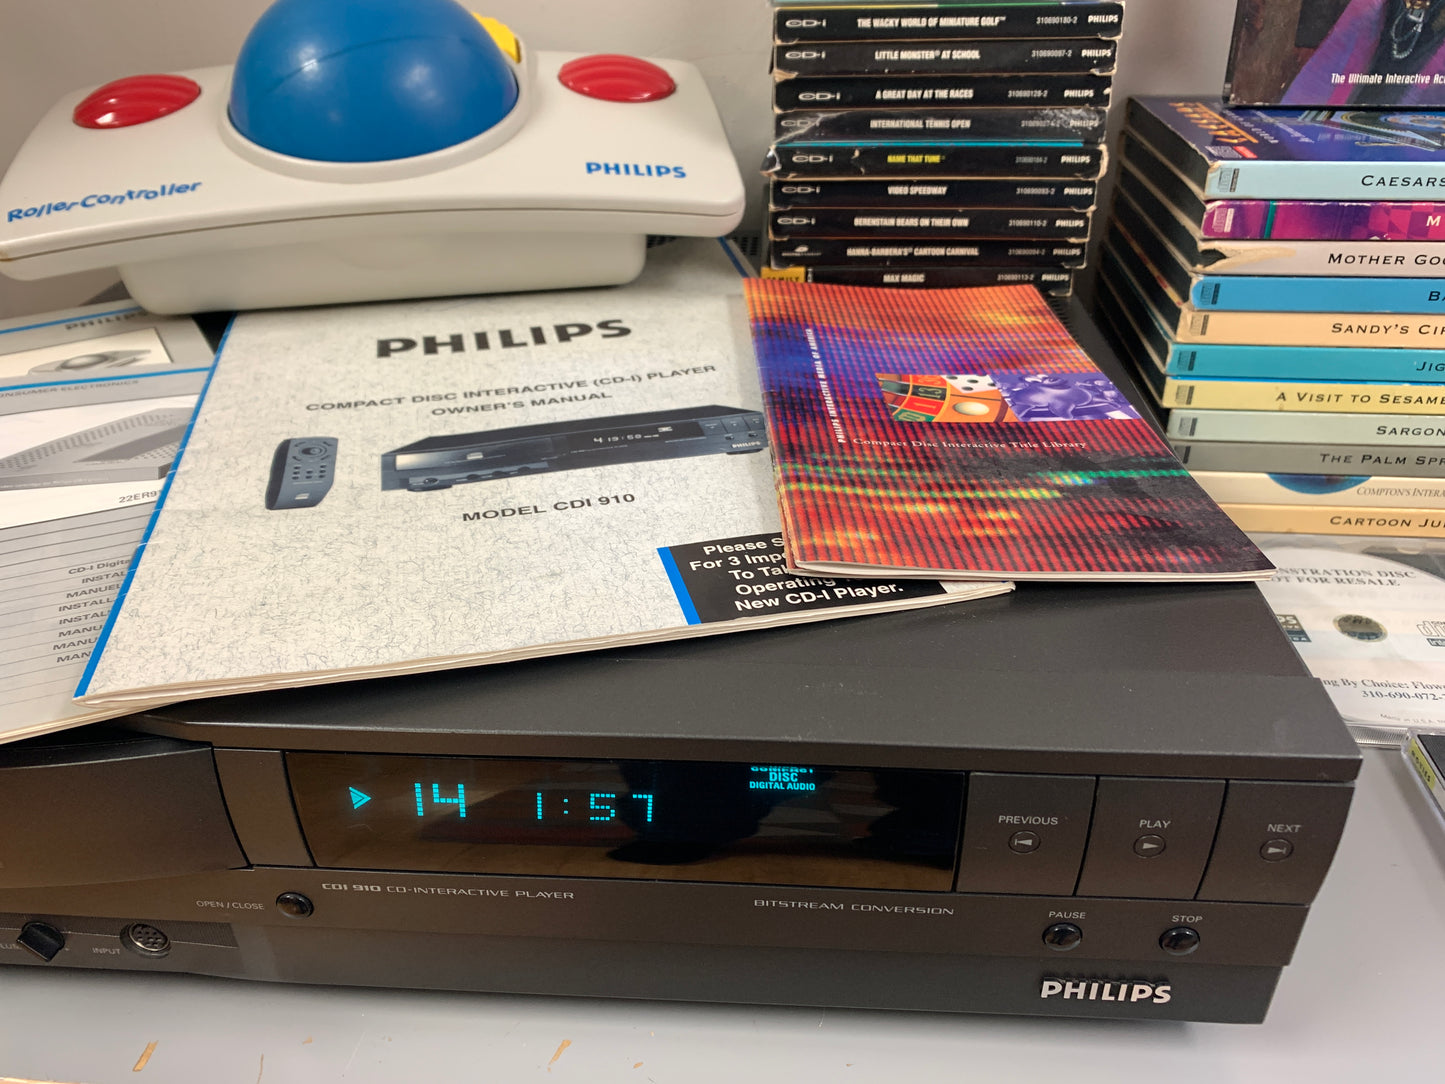 Philips CDI 910 Compact Disc Interactive Player Bundle